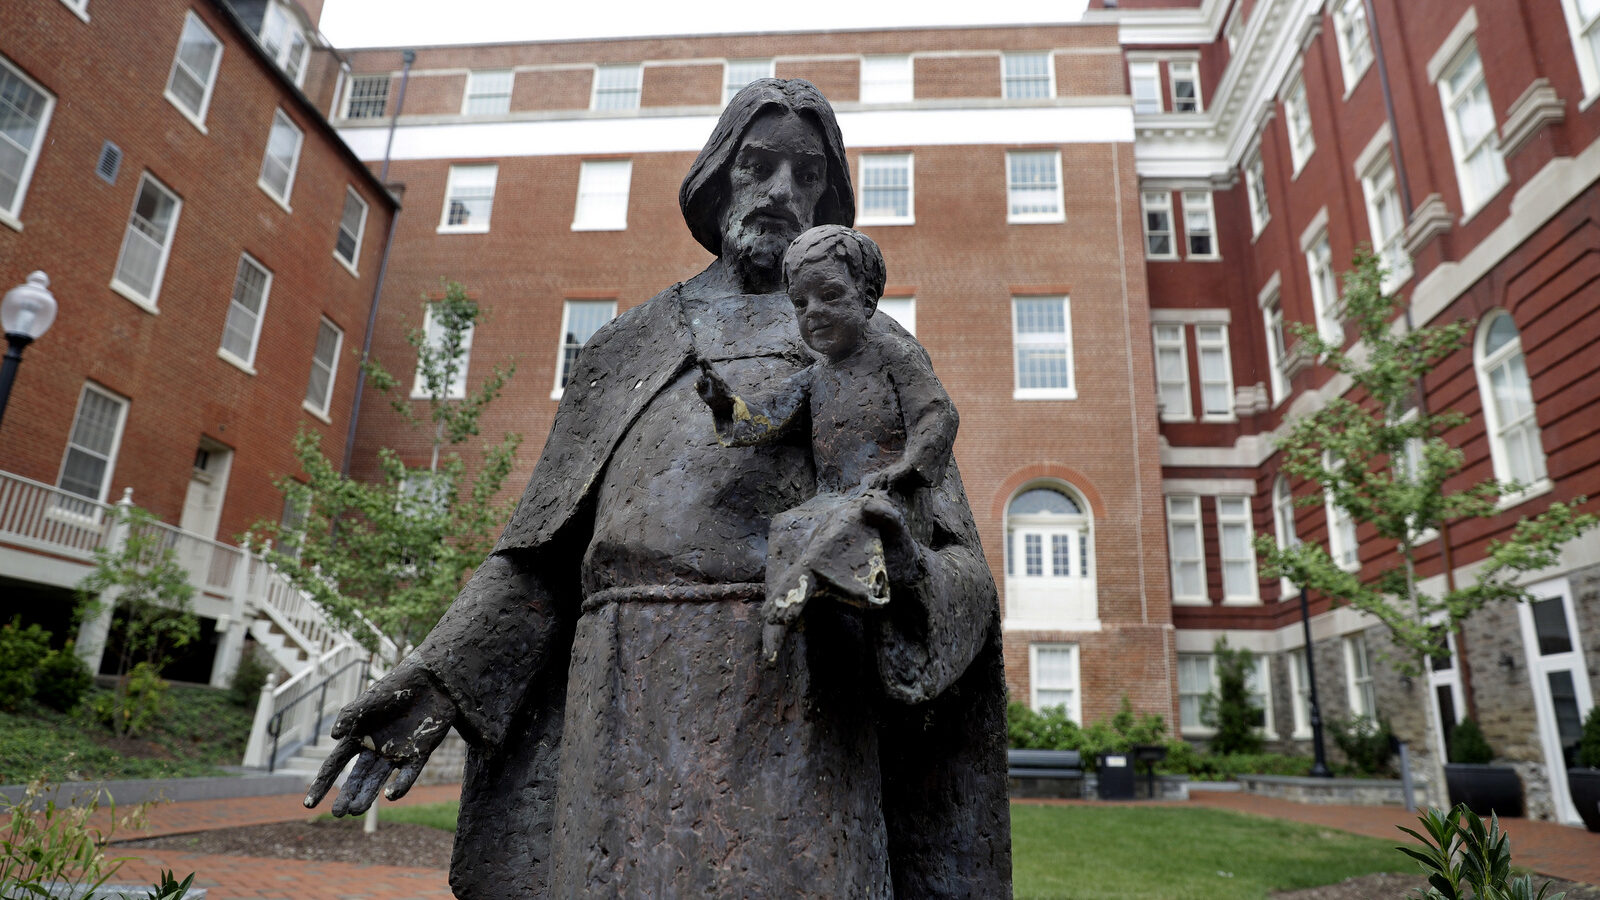 A Jesuit statue is seen in front of Freedom Hall, formerly named Mulledy Hall, on the Georgetown University campus, Thursday, Sept. 1, 2016, in Washington. (AP Photo/Jacquelyn Martin)